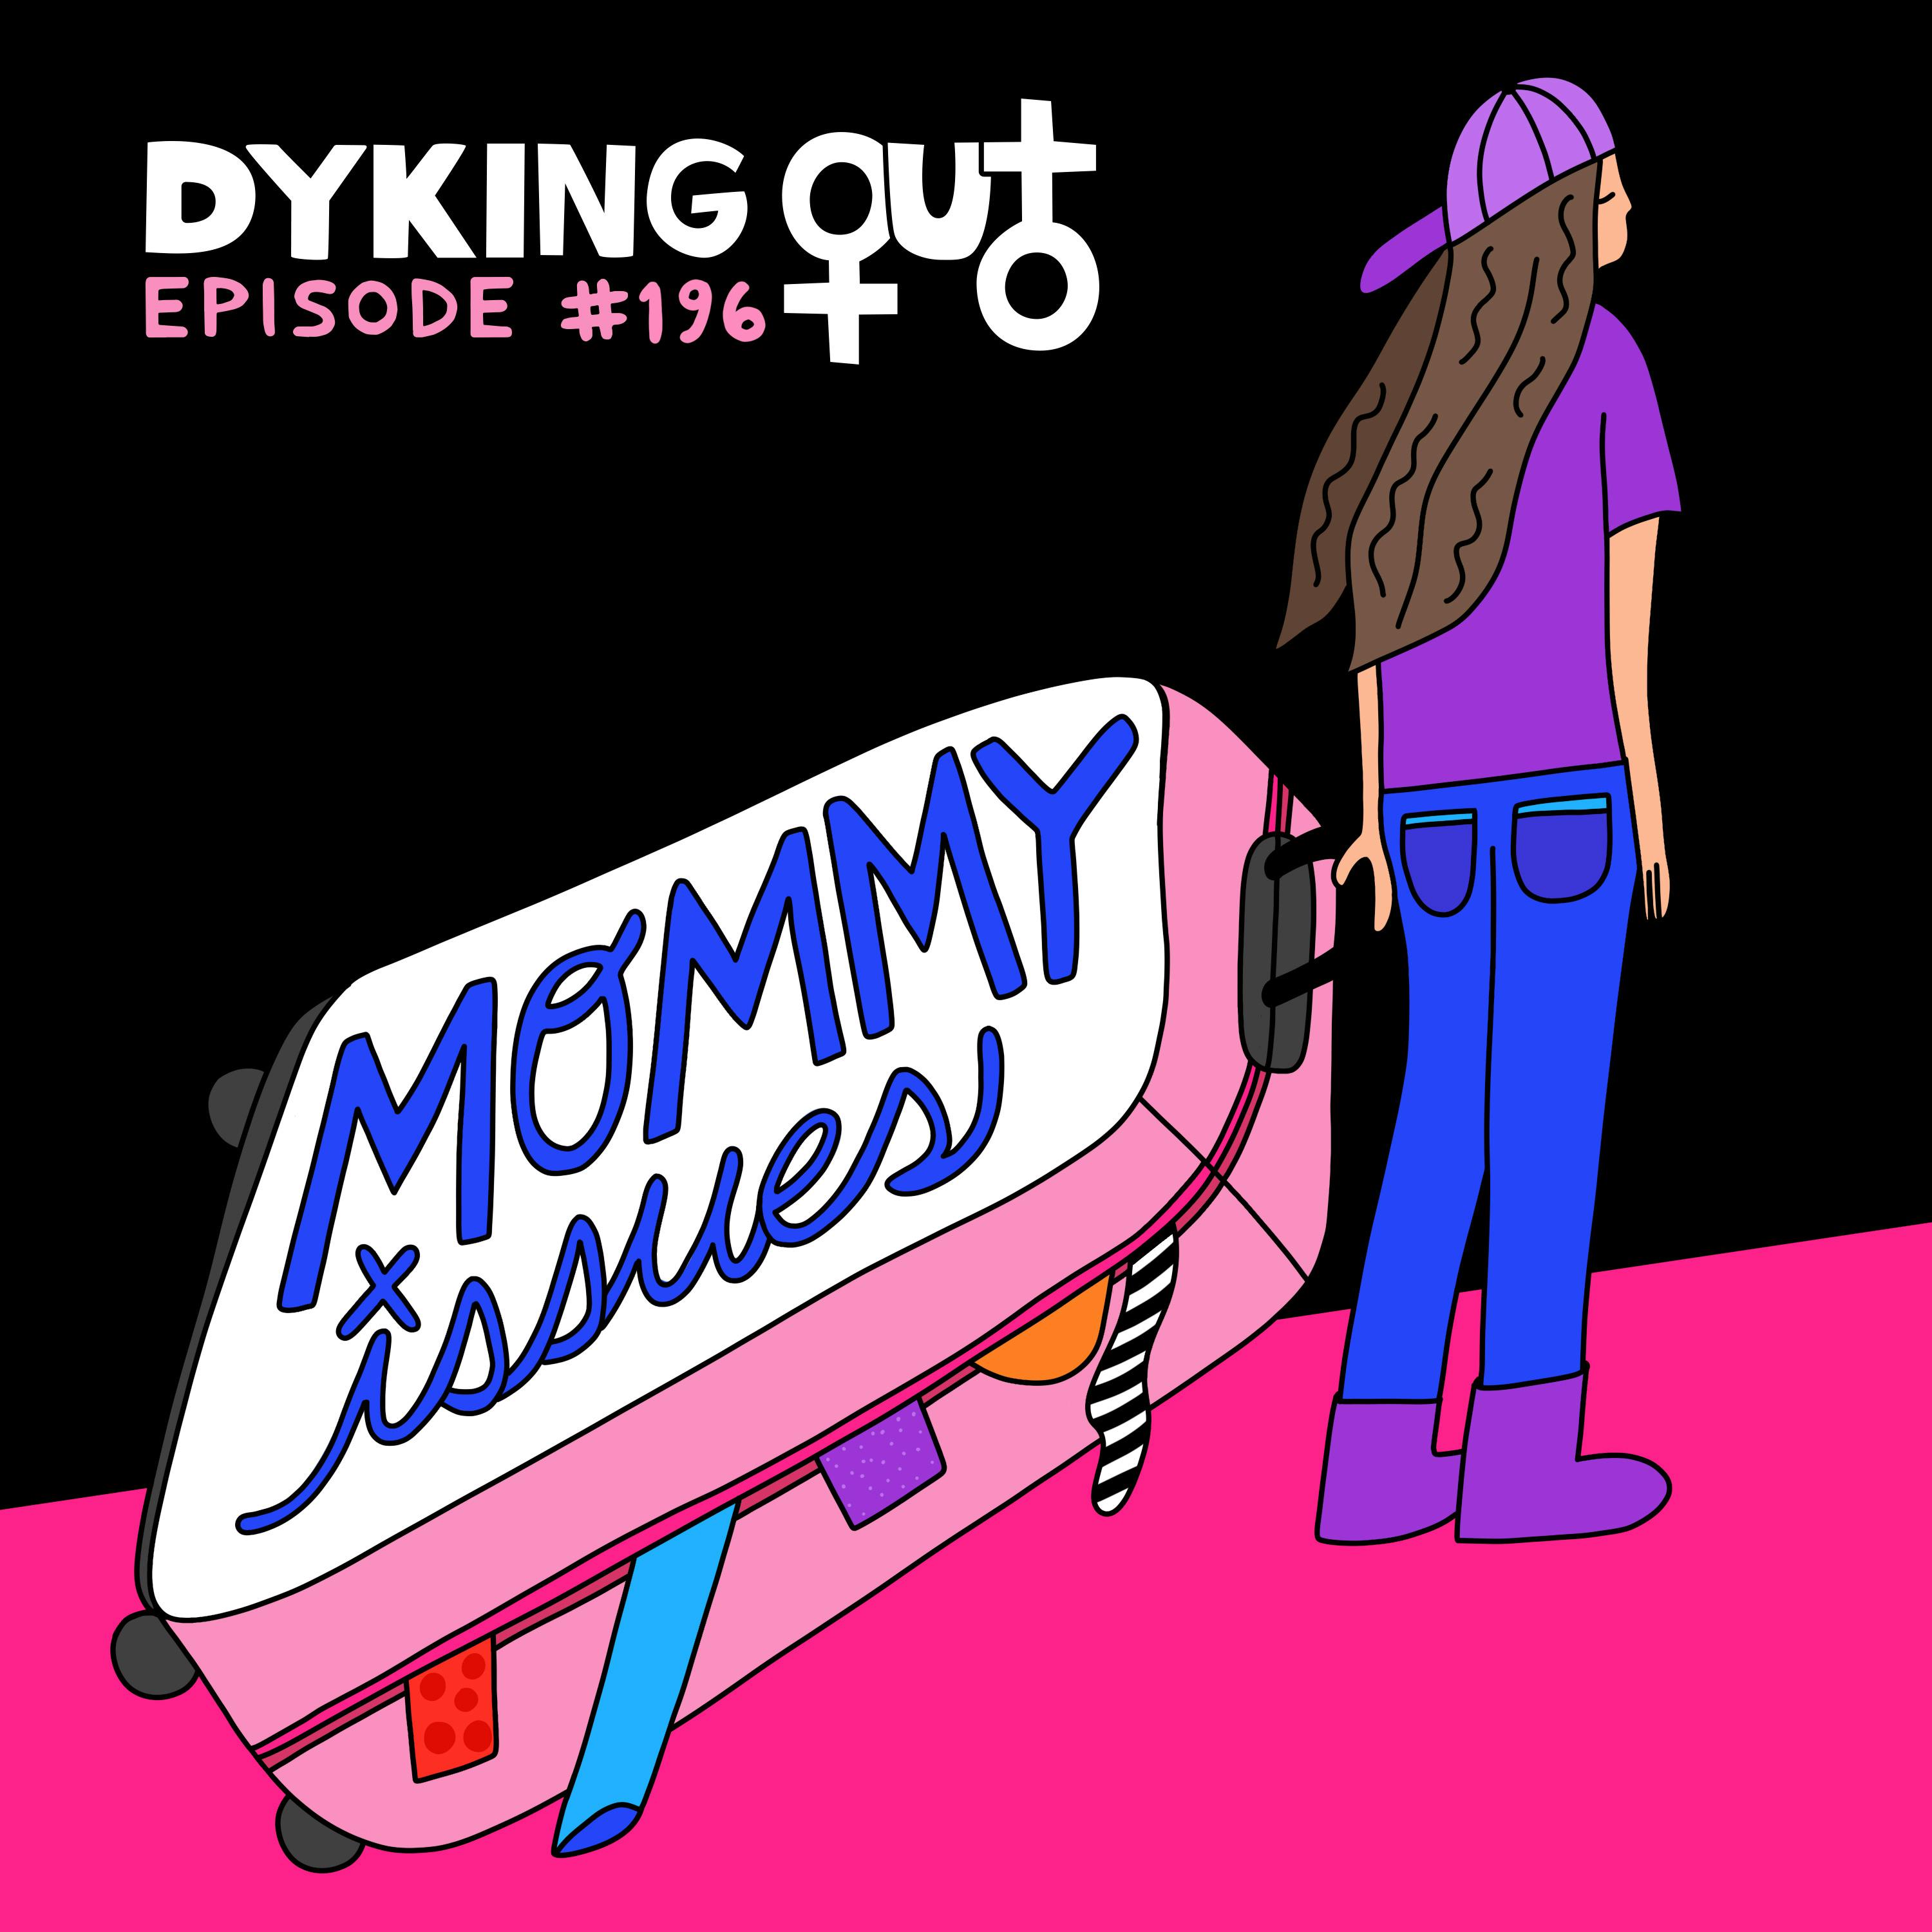 Britney Ashley Porn - Mommy Issues w/ Brittany Ashley - Dyking Out - a Lesbian and LGBTQIA  Podcast for Everyone! | Lyssna hÃ¤r | Poddtoppen.se